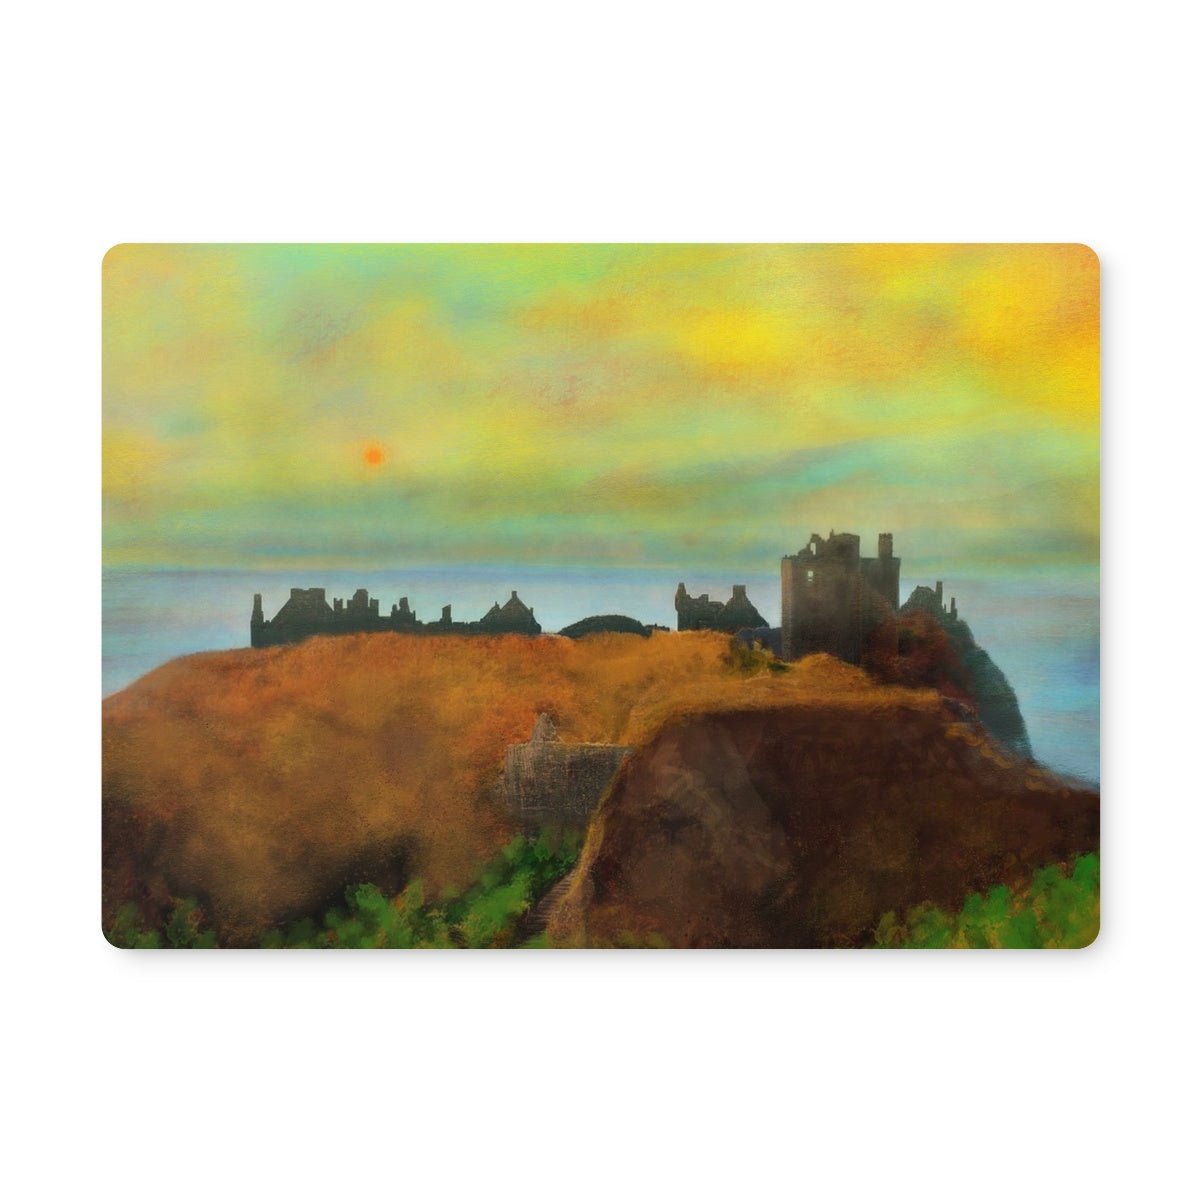 Dunnottar Castle Art Gifts Placemat-Placemats-Historic & Iconic Scotland Art Gallery-2 Placemats-Paintings, Prints, Homeware, Art Gifts From Scotland By Scottish Artist Kevin Hunter